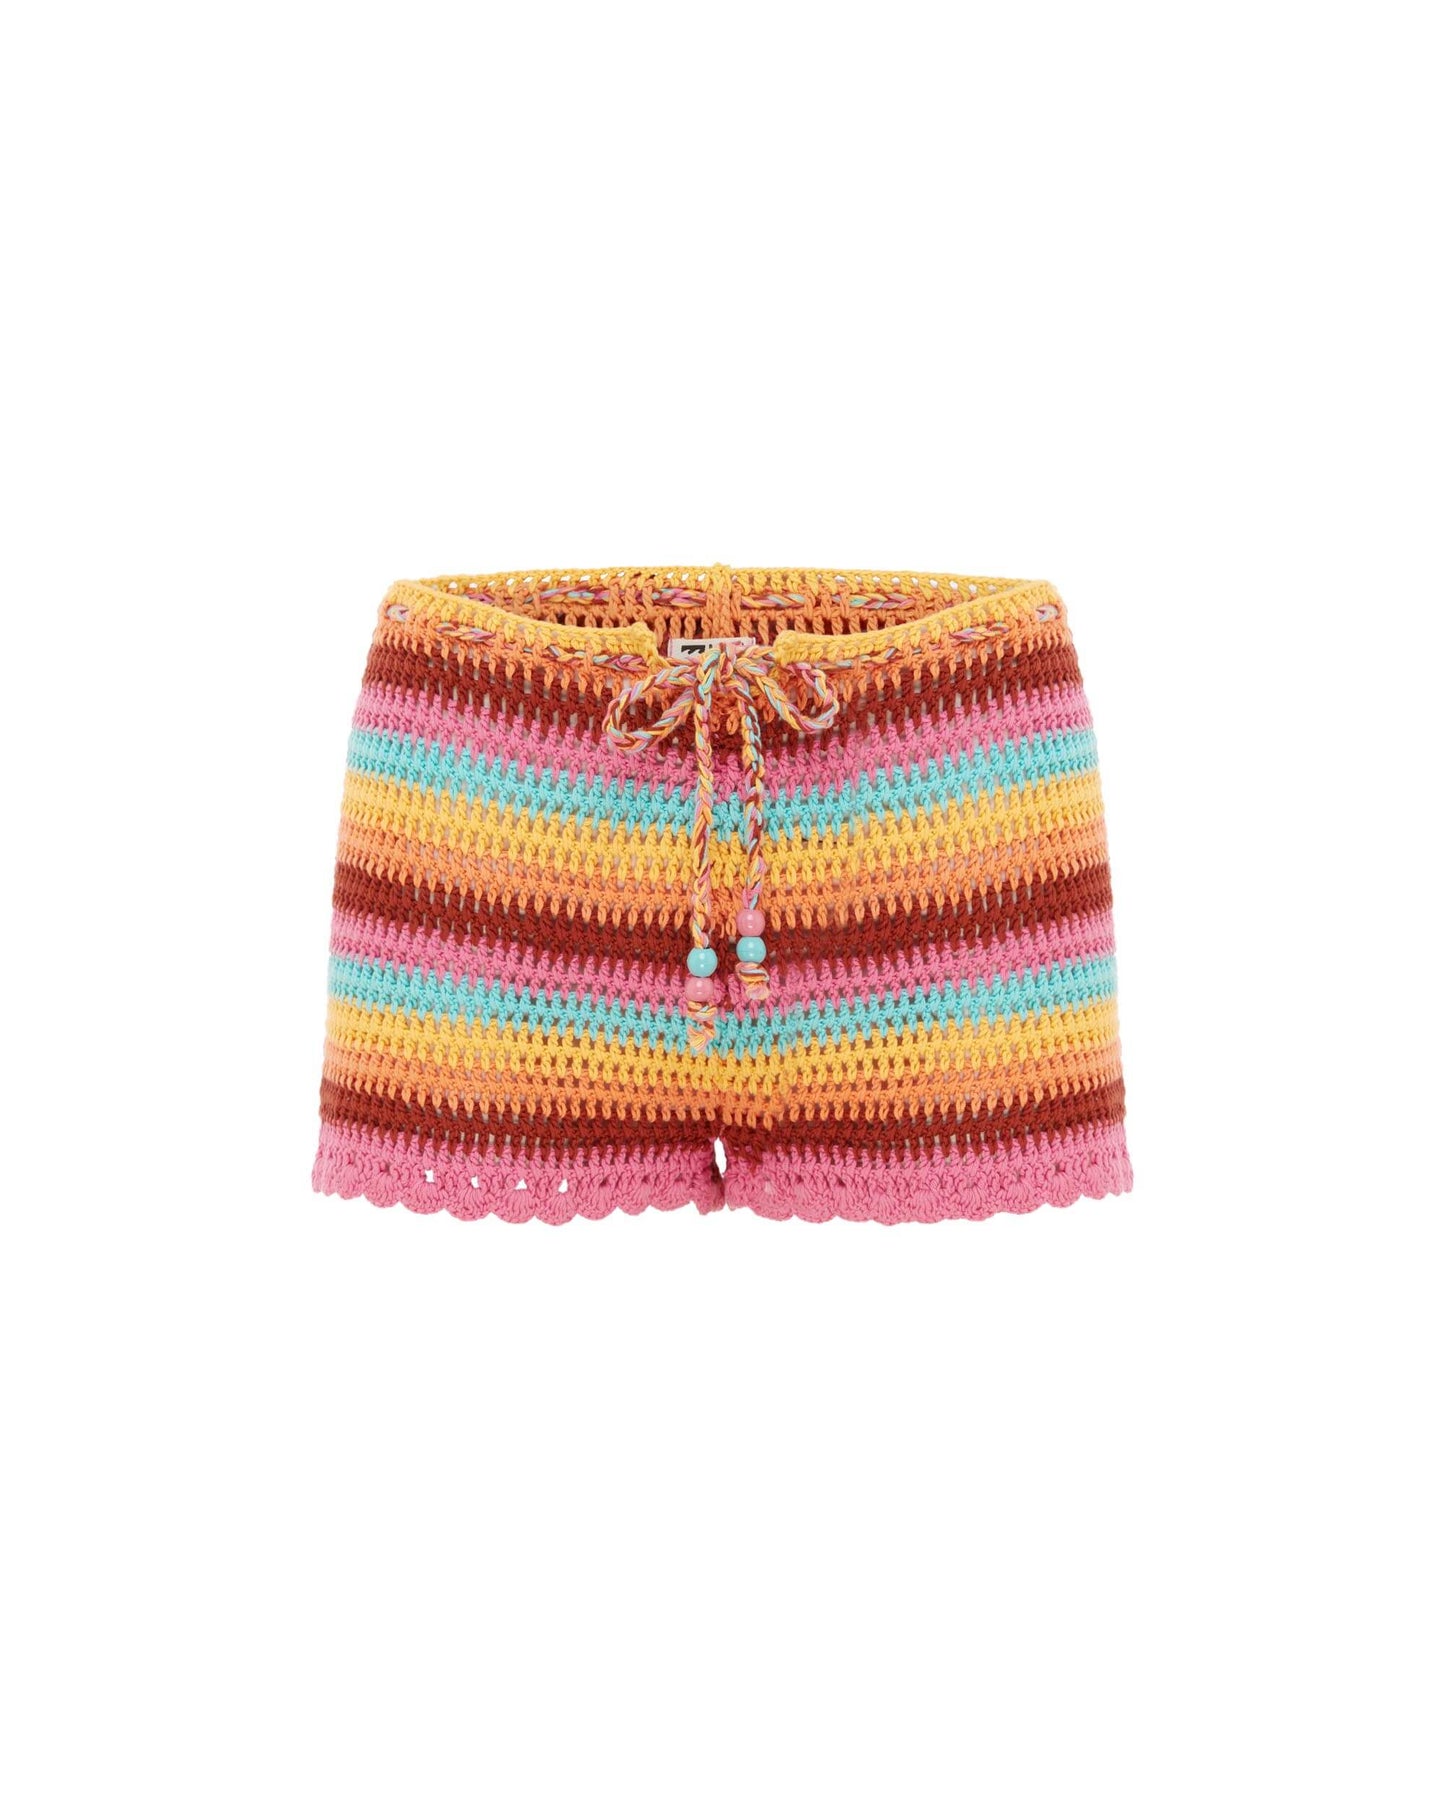 Its now cool BOARDSHORTS SIESTA SHORT - MULTI COLOUR in Mehrfarbig